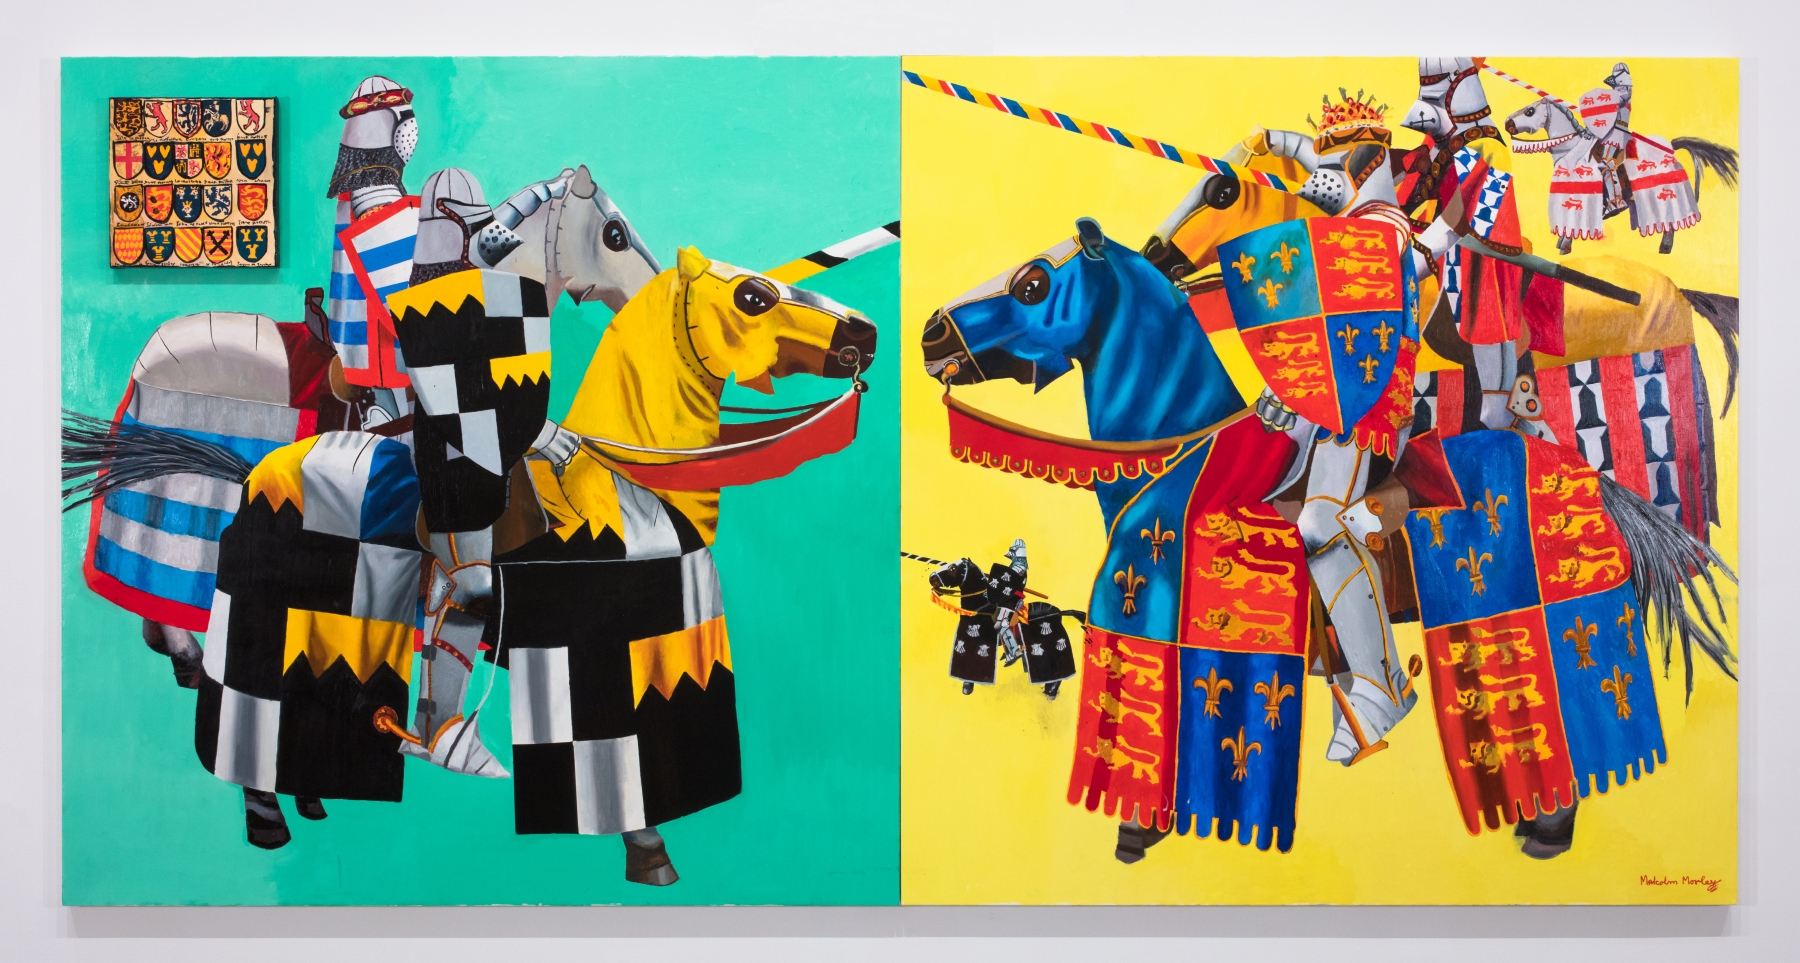 diptych of knights on horseback against teal and yellow backgrounds